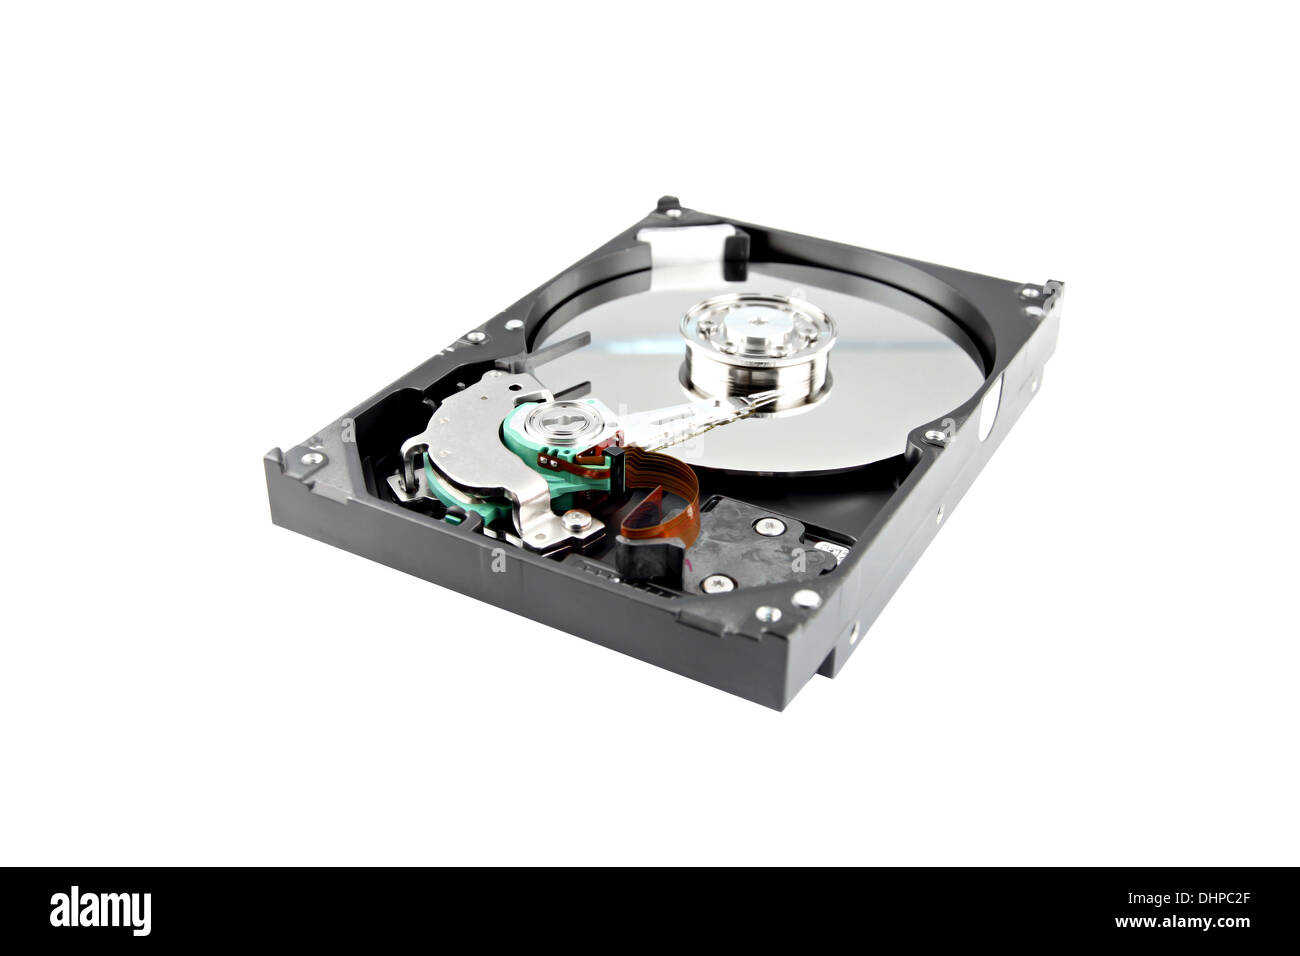 Hard drive to store data place to the left on white background. Stock Photo